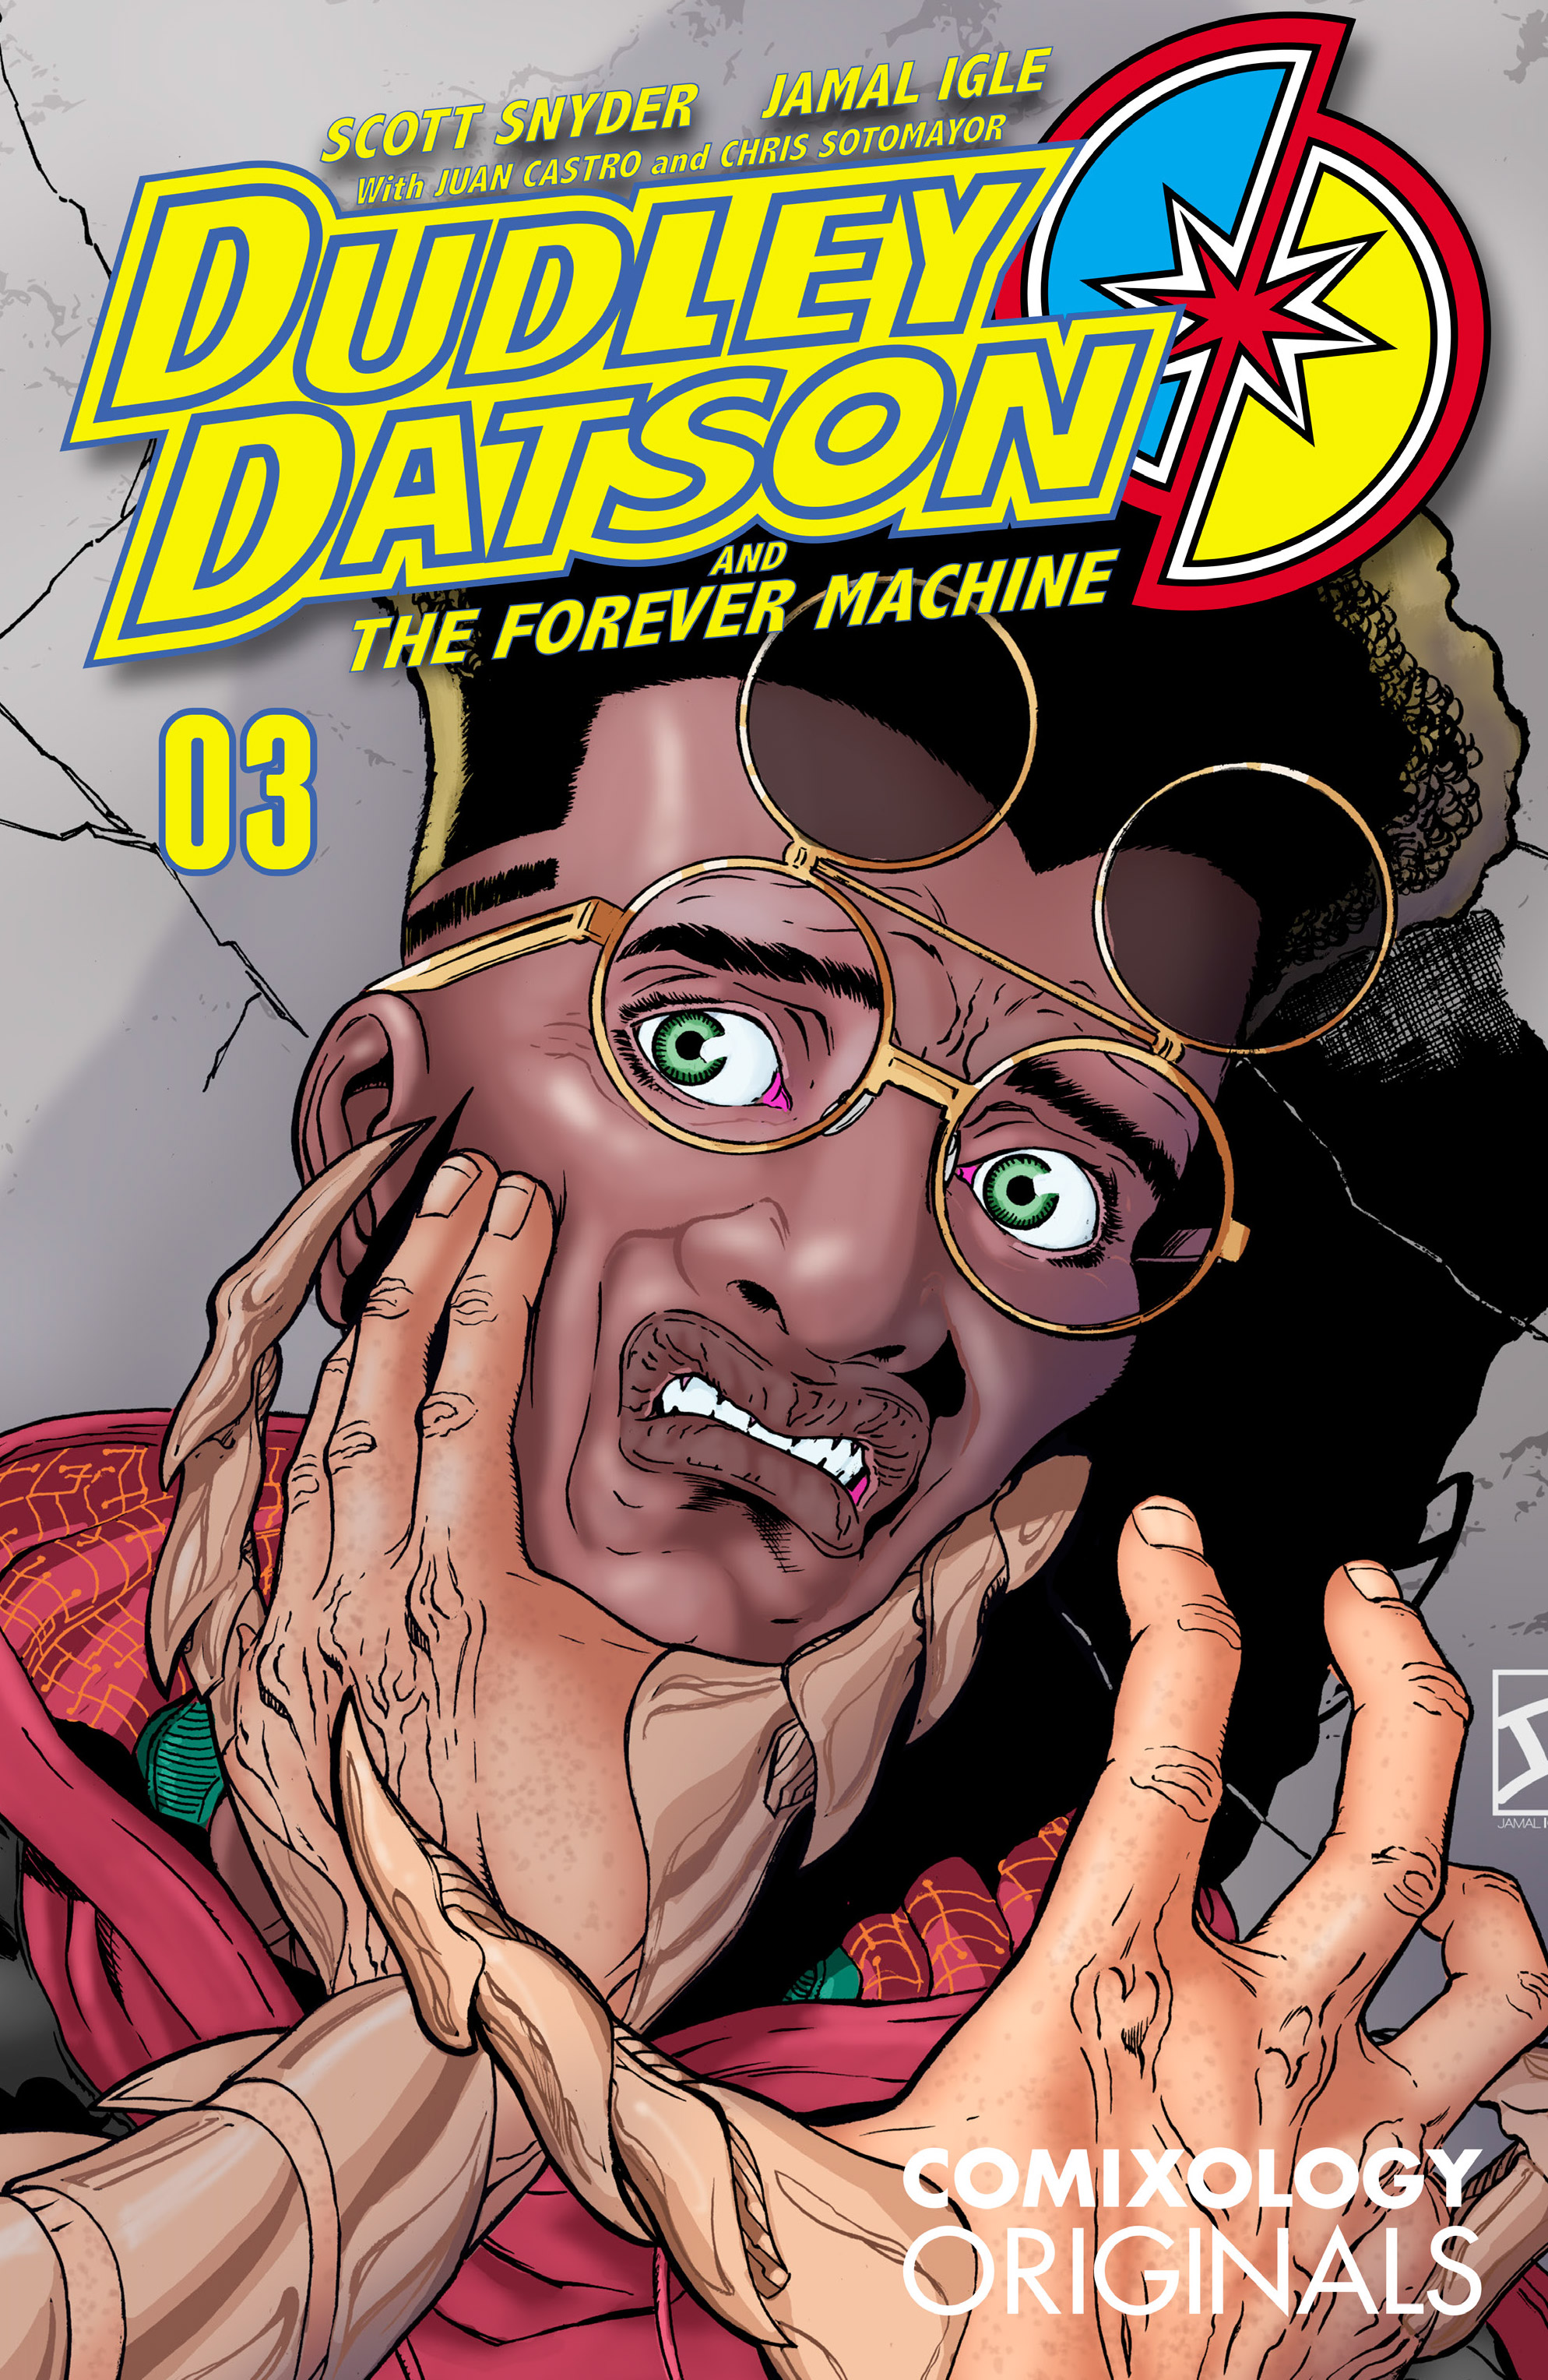 Read online Dudley Datson and the Forever Machine comic -  Issue #3 - 1